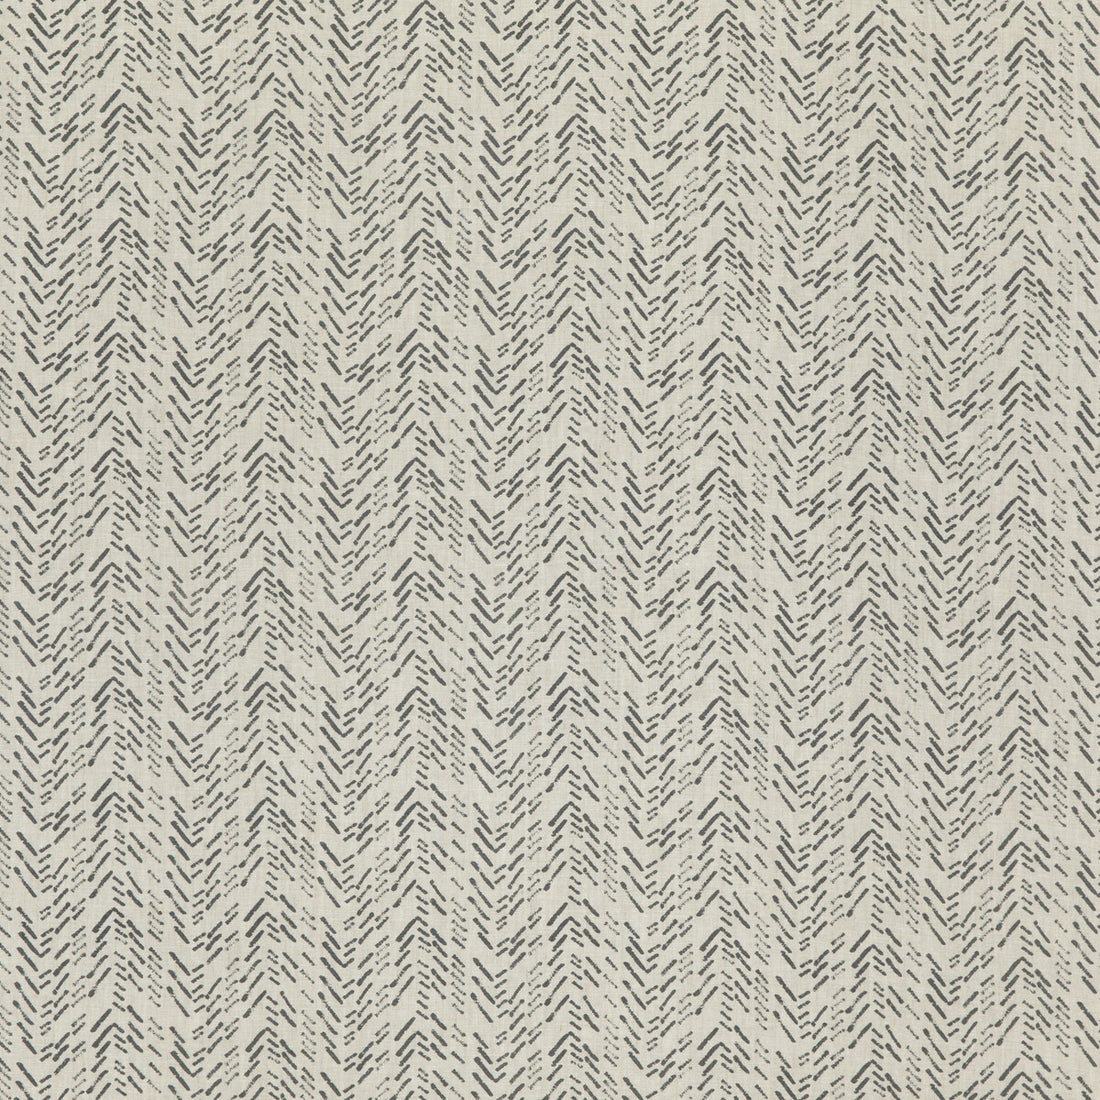 Izora fabric in charcoal color - pattern ED75035.3.0 - by Threads in the Moro collection